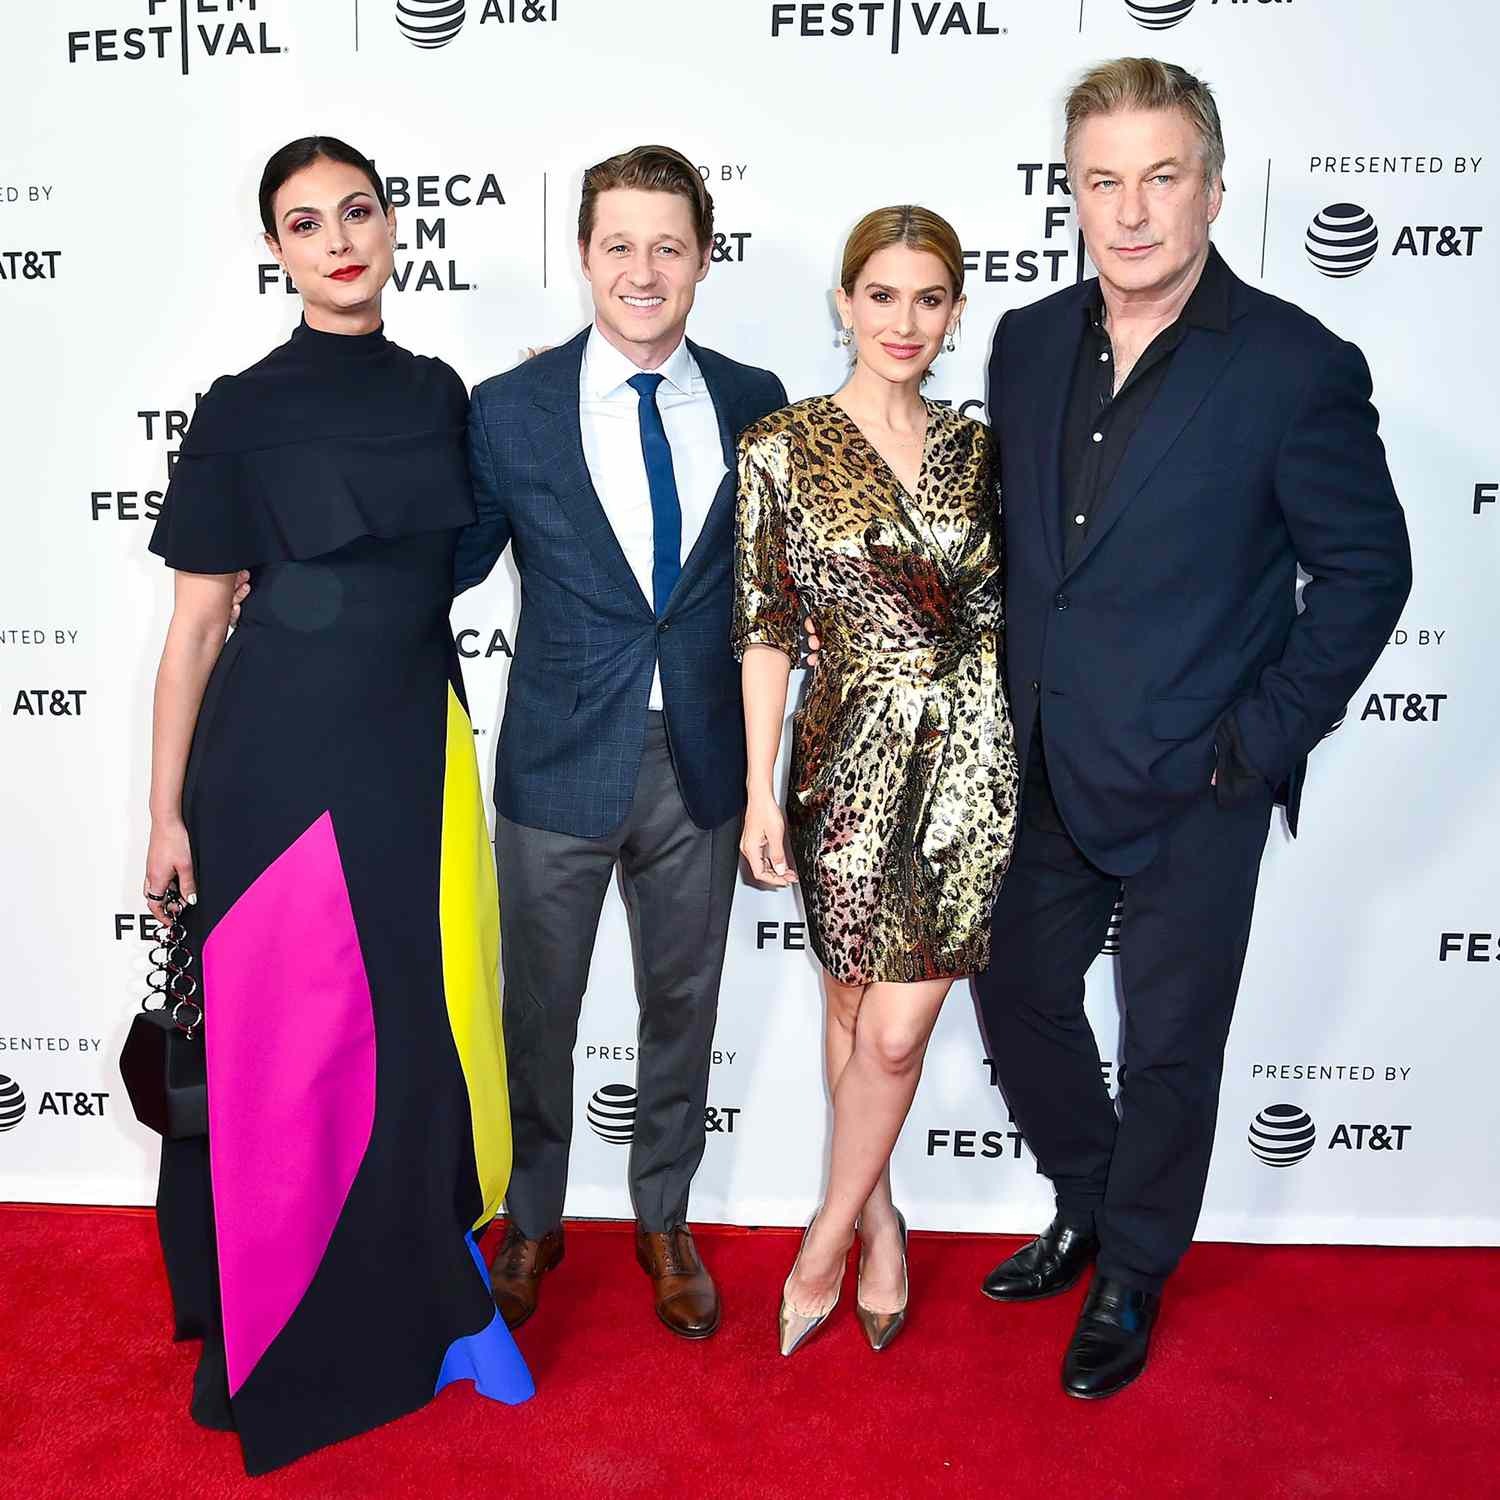 NEW YORK, NY - APRIL 30: Morena Baccarin, Ben Mckenzie, Hilaria Baldwin, and Alec Baldwin attend a screening of Framing John DeLorean during the 2019 Tribeca Film Festival at SVA Theater on April 30, 2019 in New York City. (Photo by Steven Ferdman/Getty Images for Tribeca Film Festival)